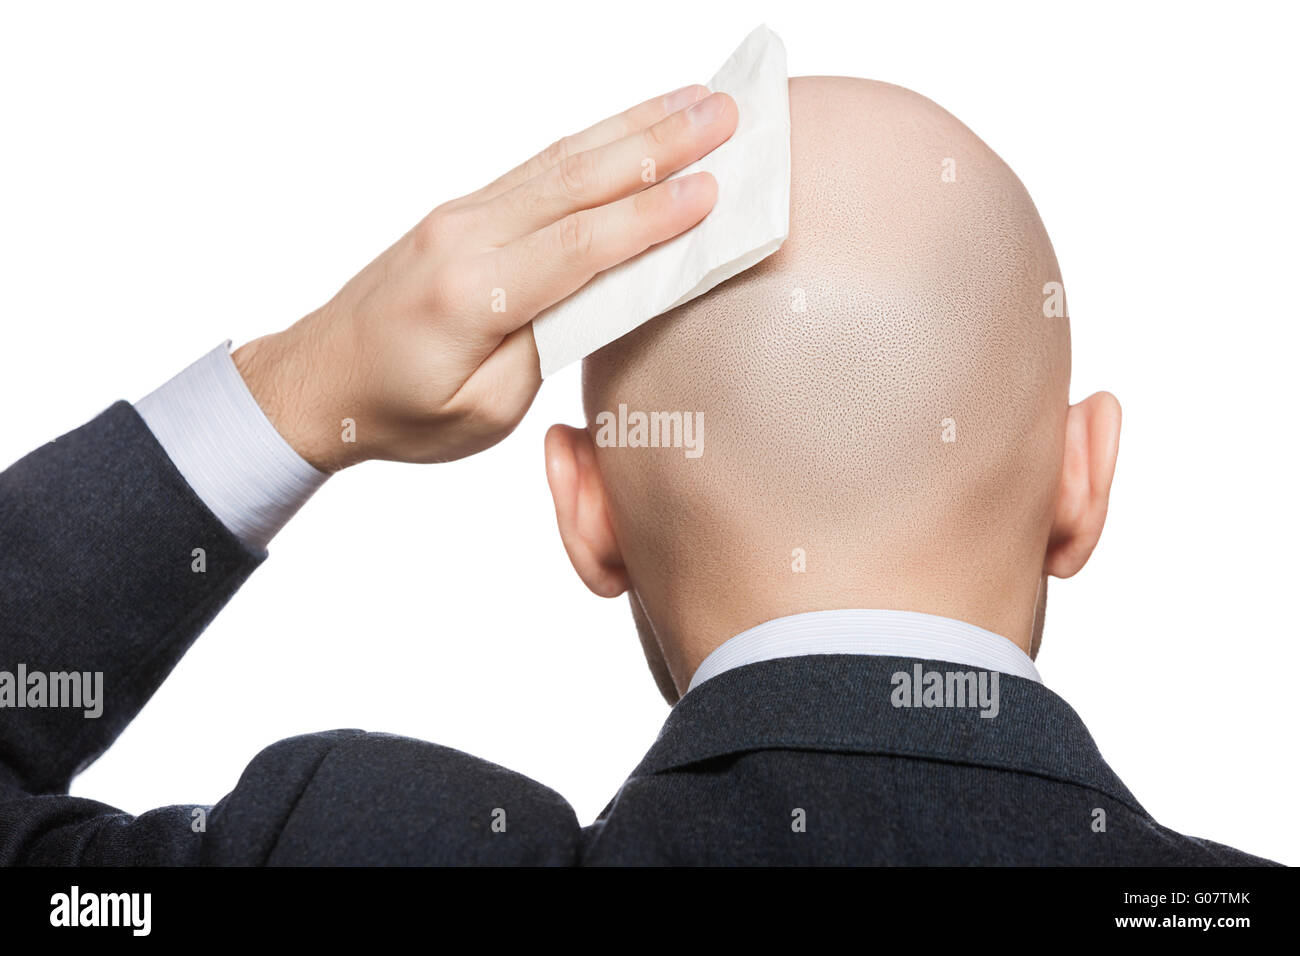 Hand holding tissue wiping or drying bald sweat he Stock Photo